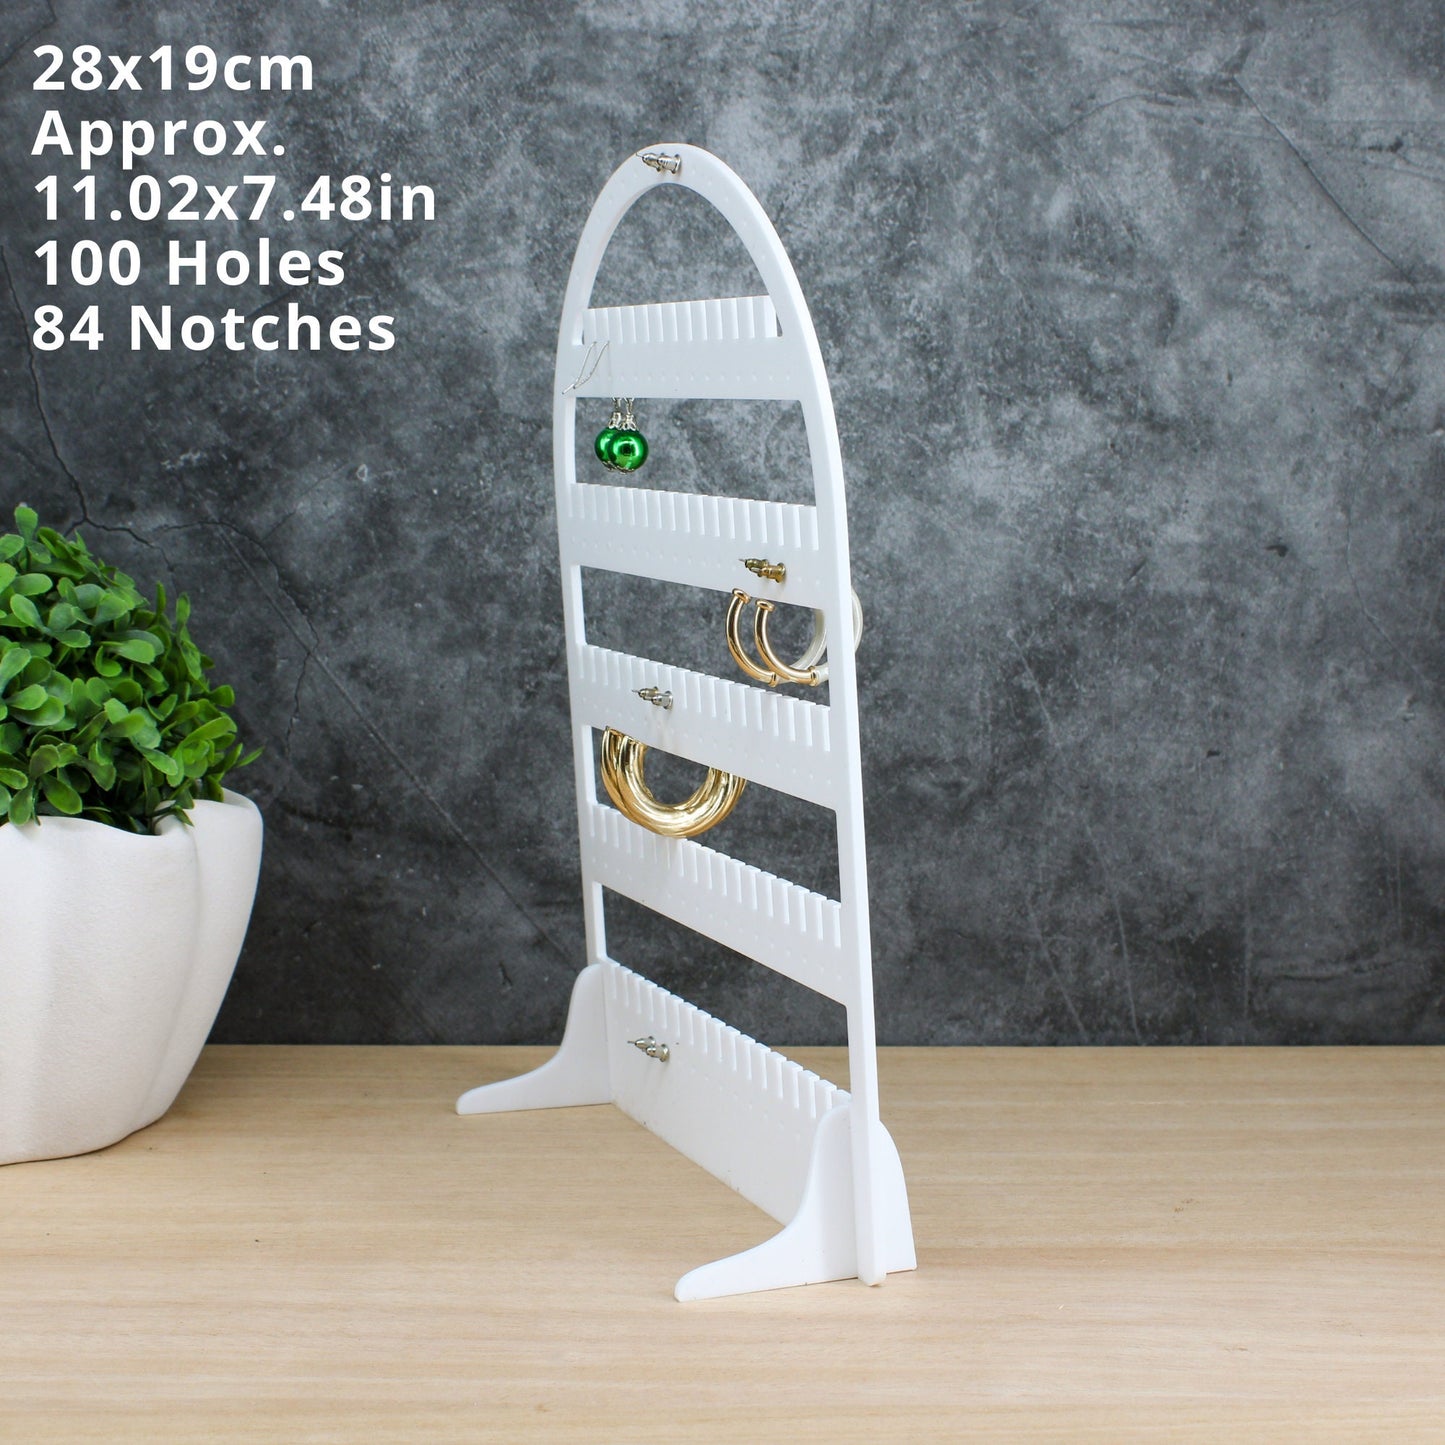 Earring Holder Plate - Arch Stud Earring Stand - Acrylic Jewellery Display | White Home Decor